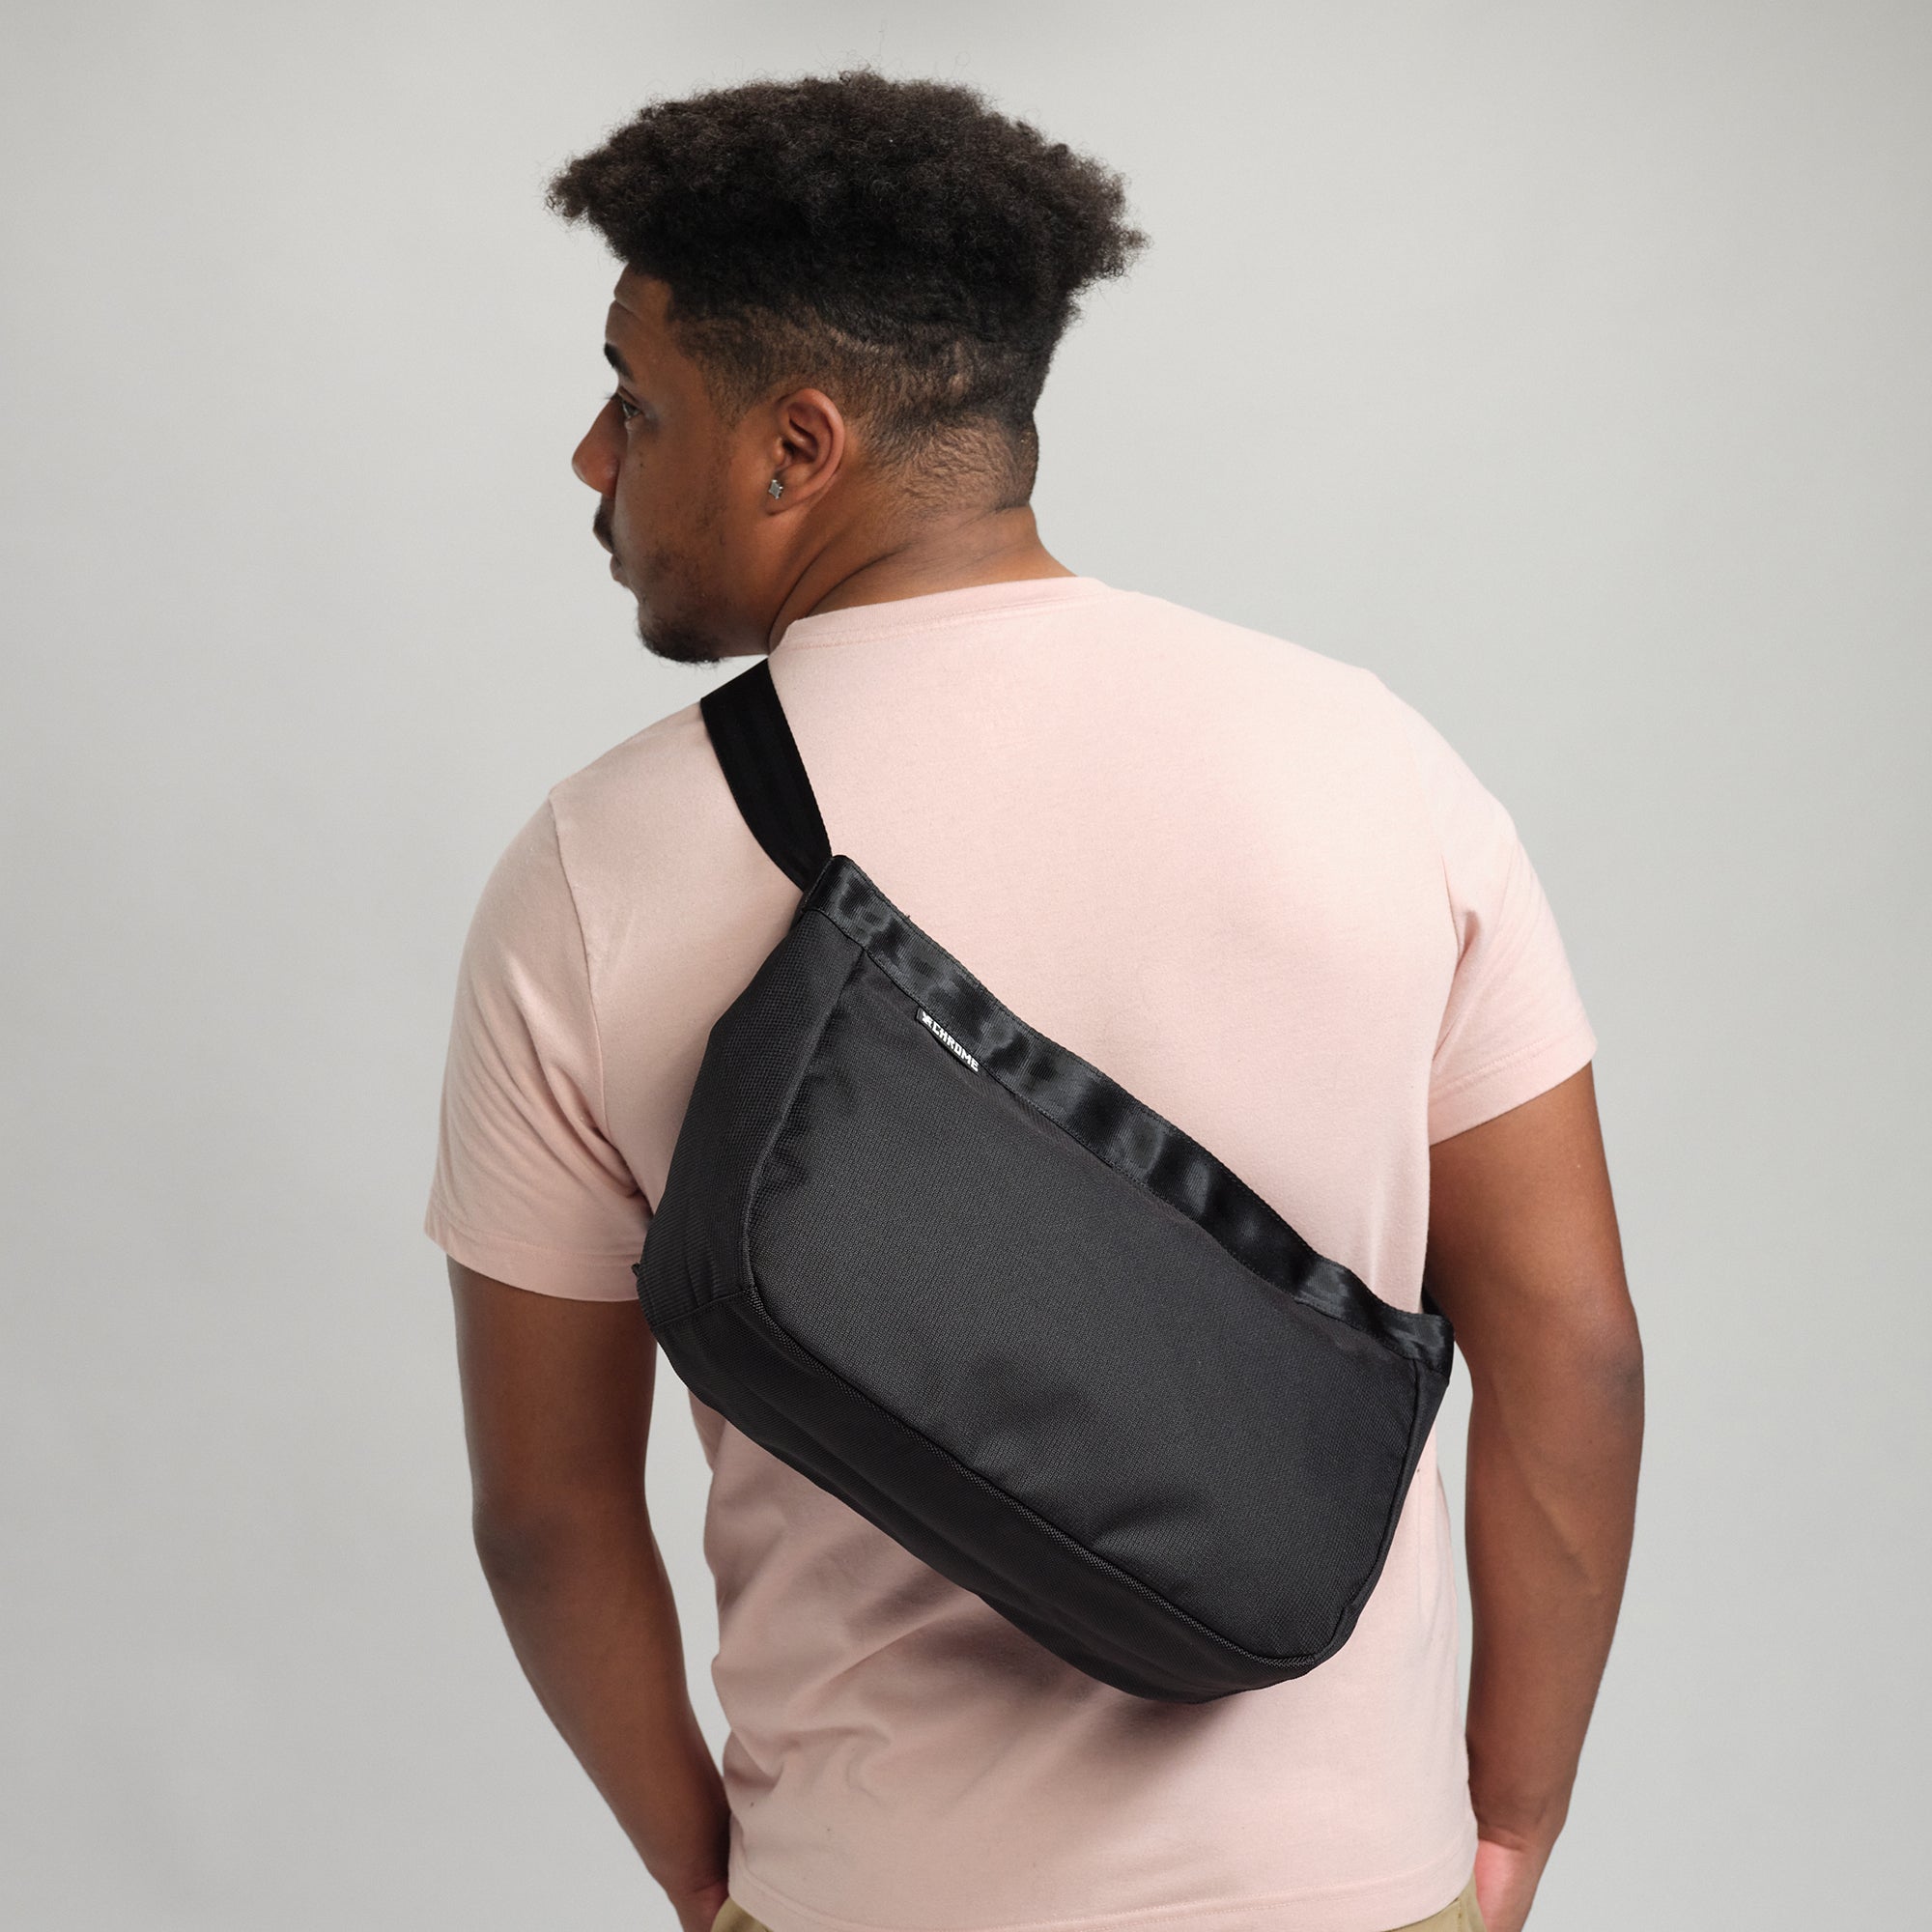 Ruckas Messenger in black worn by a man back view